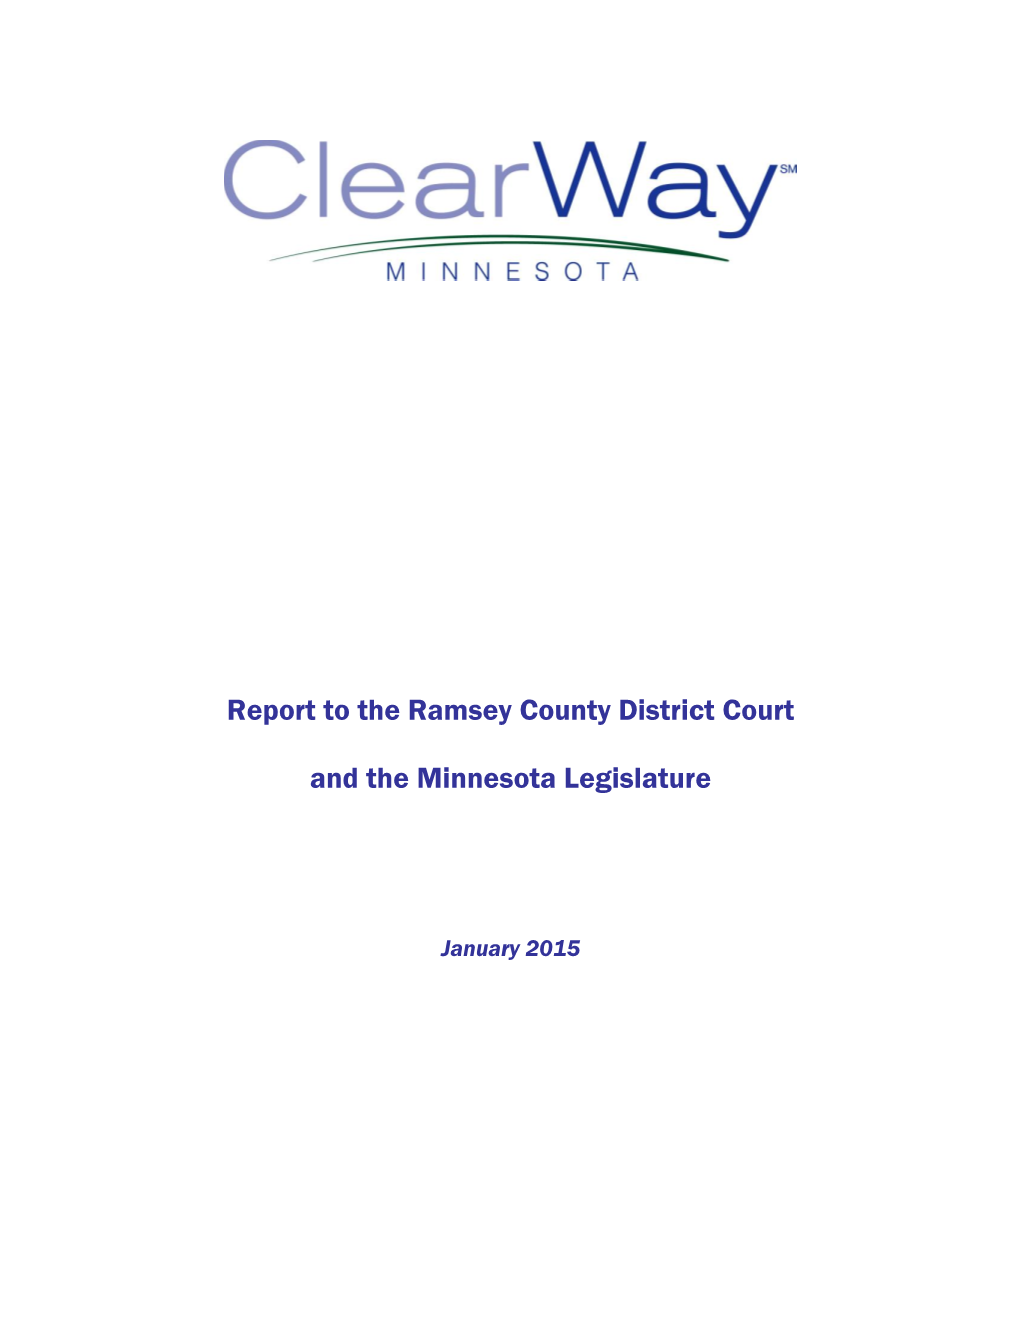 Report to the Ramsey County District Court and the Minnesota Legislature